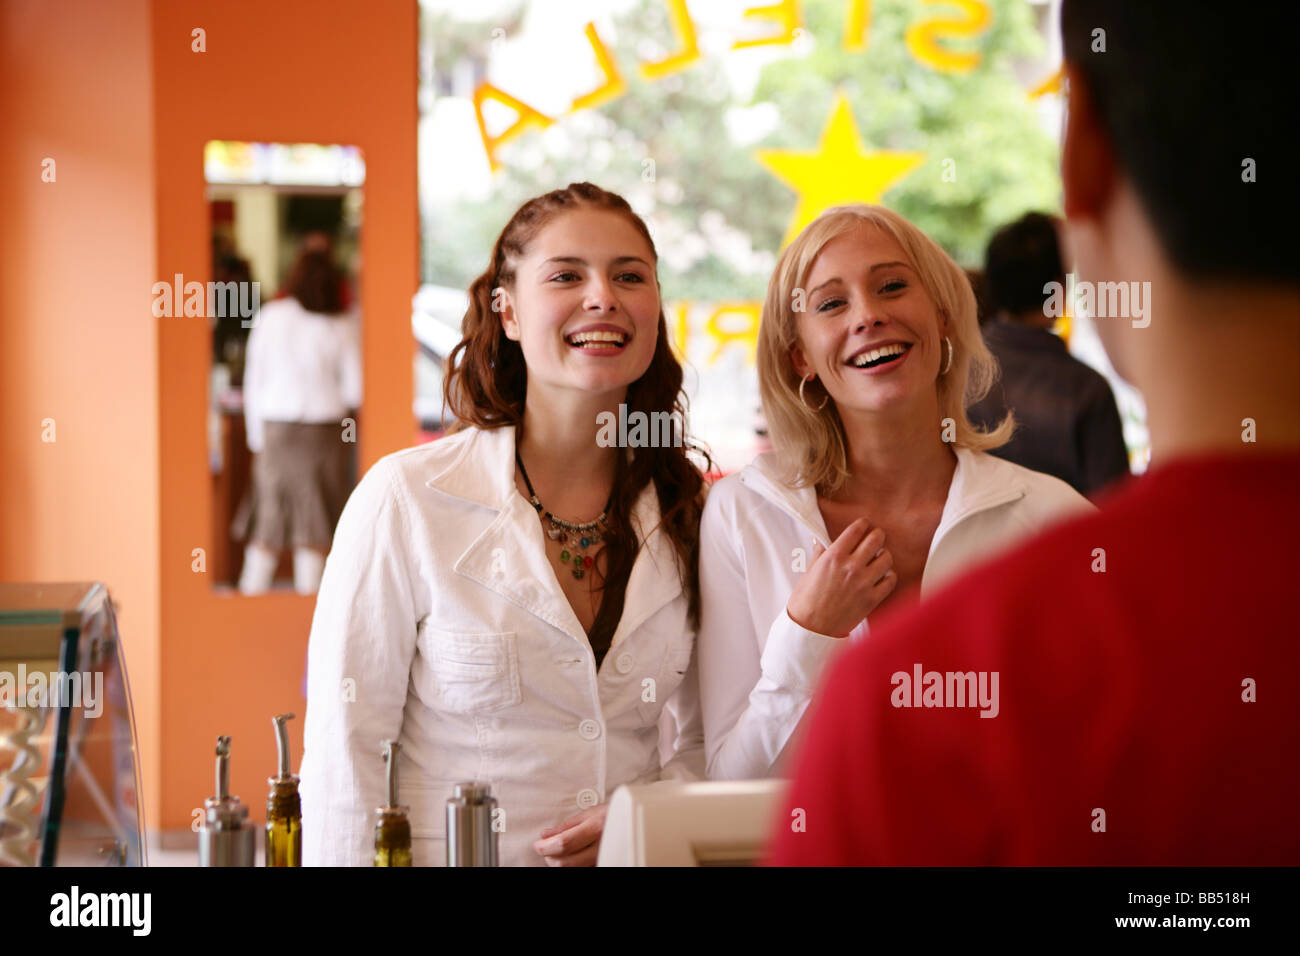 two teenager female smiling at the counter Stock Photo